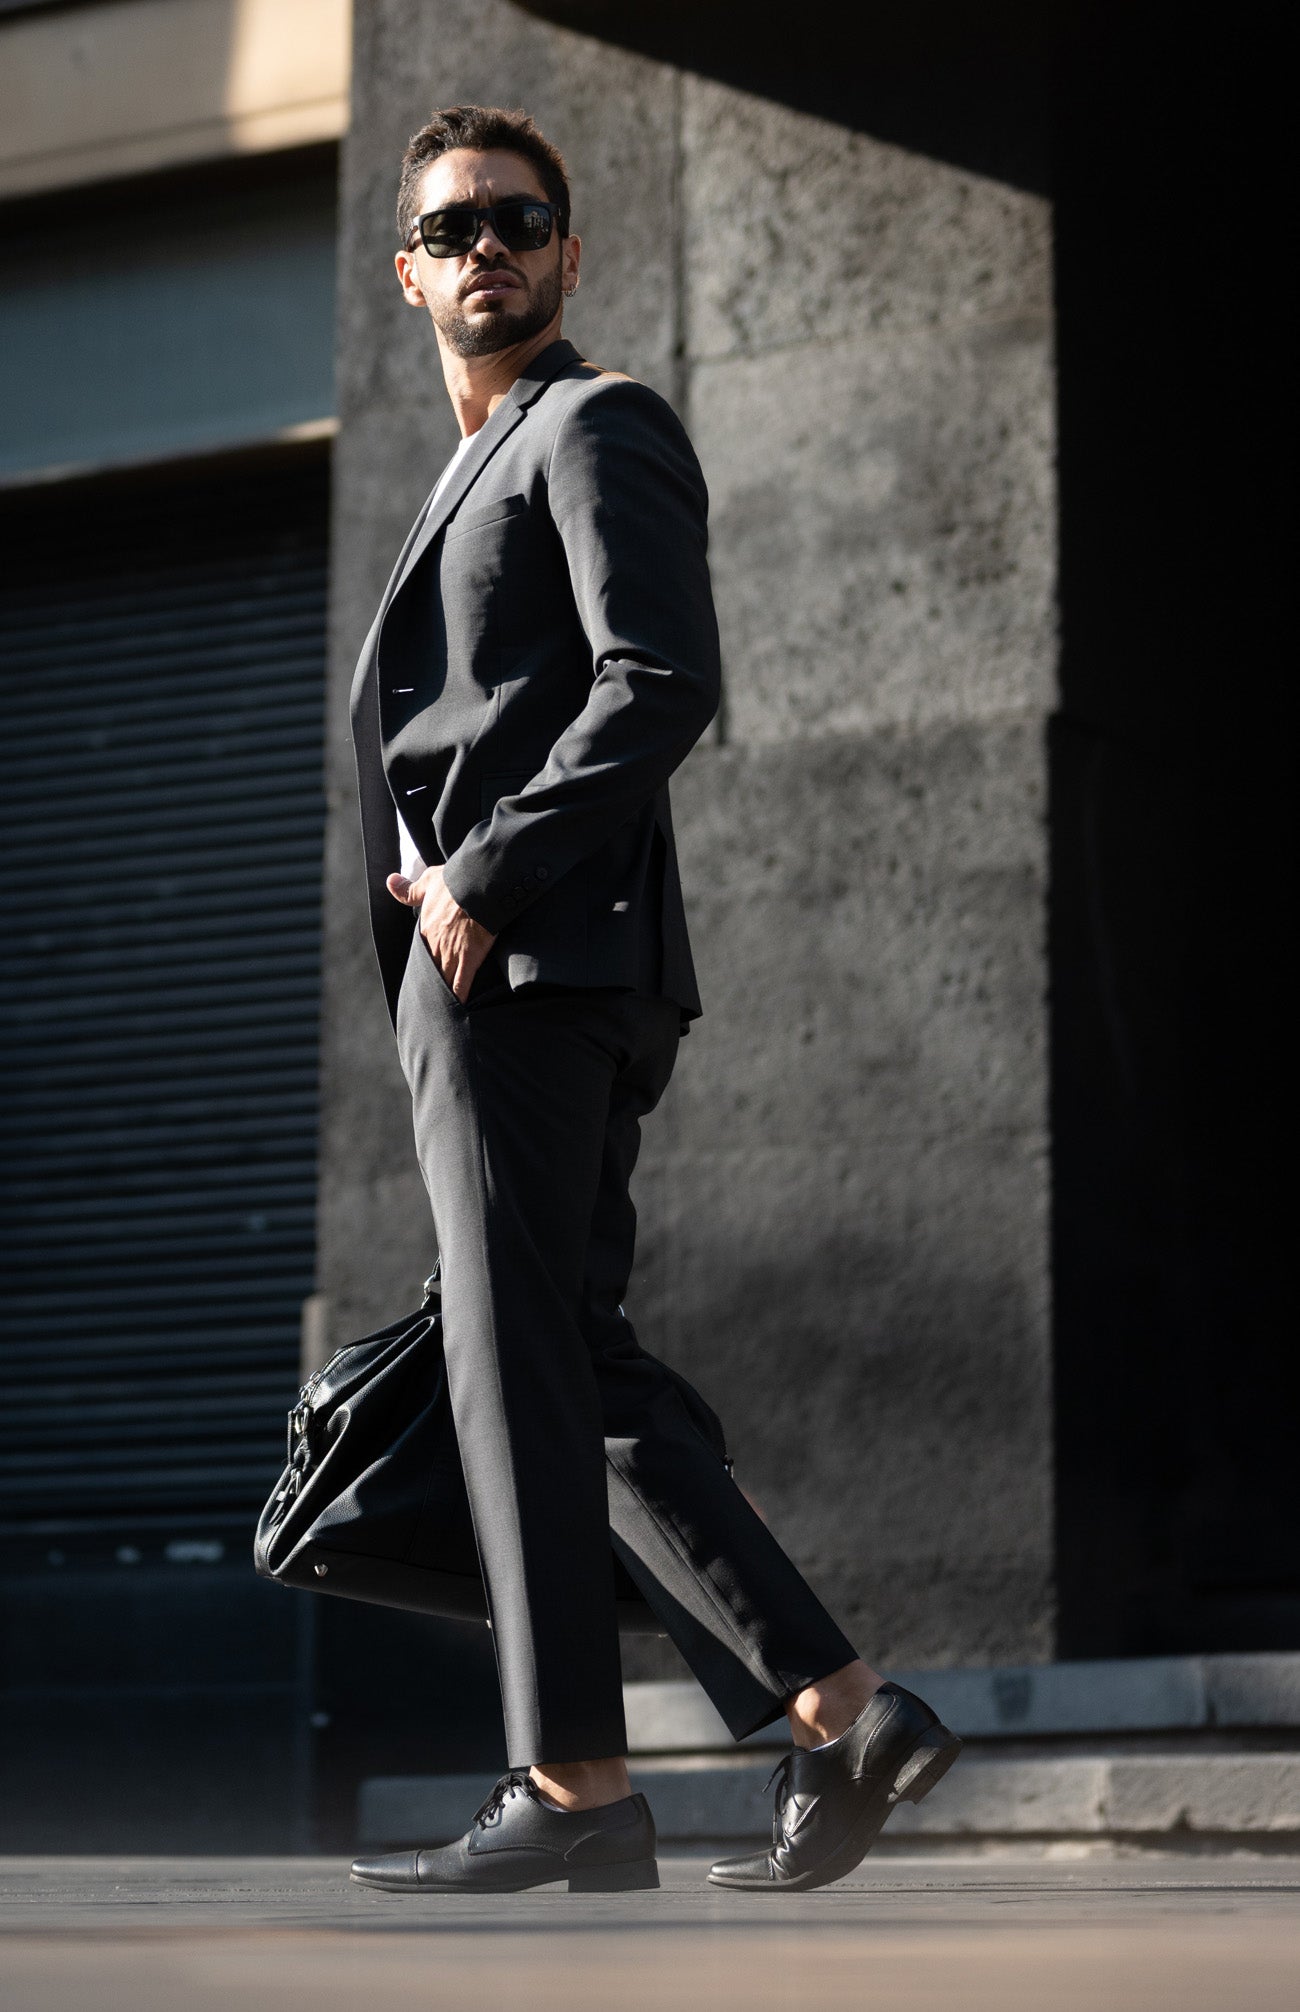 Man wearing a black suit with black shoes